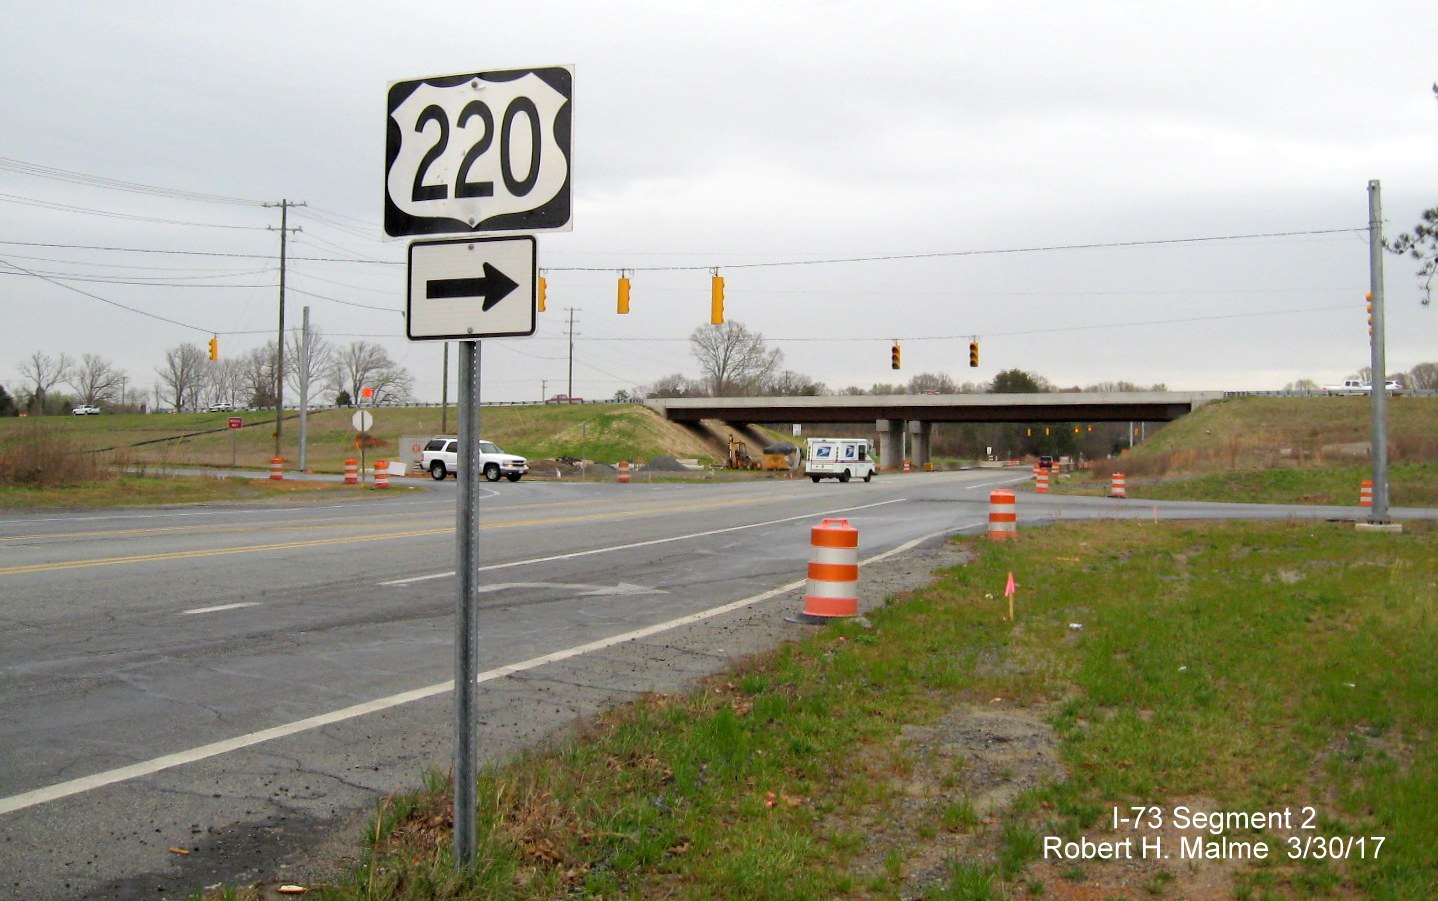 Image of US 220 trailblazer along US 158 East approaching under construction interchange with Future I-73 in Guilford County